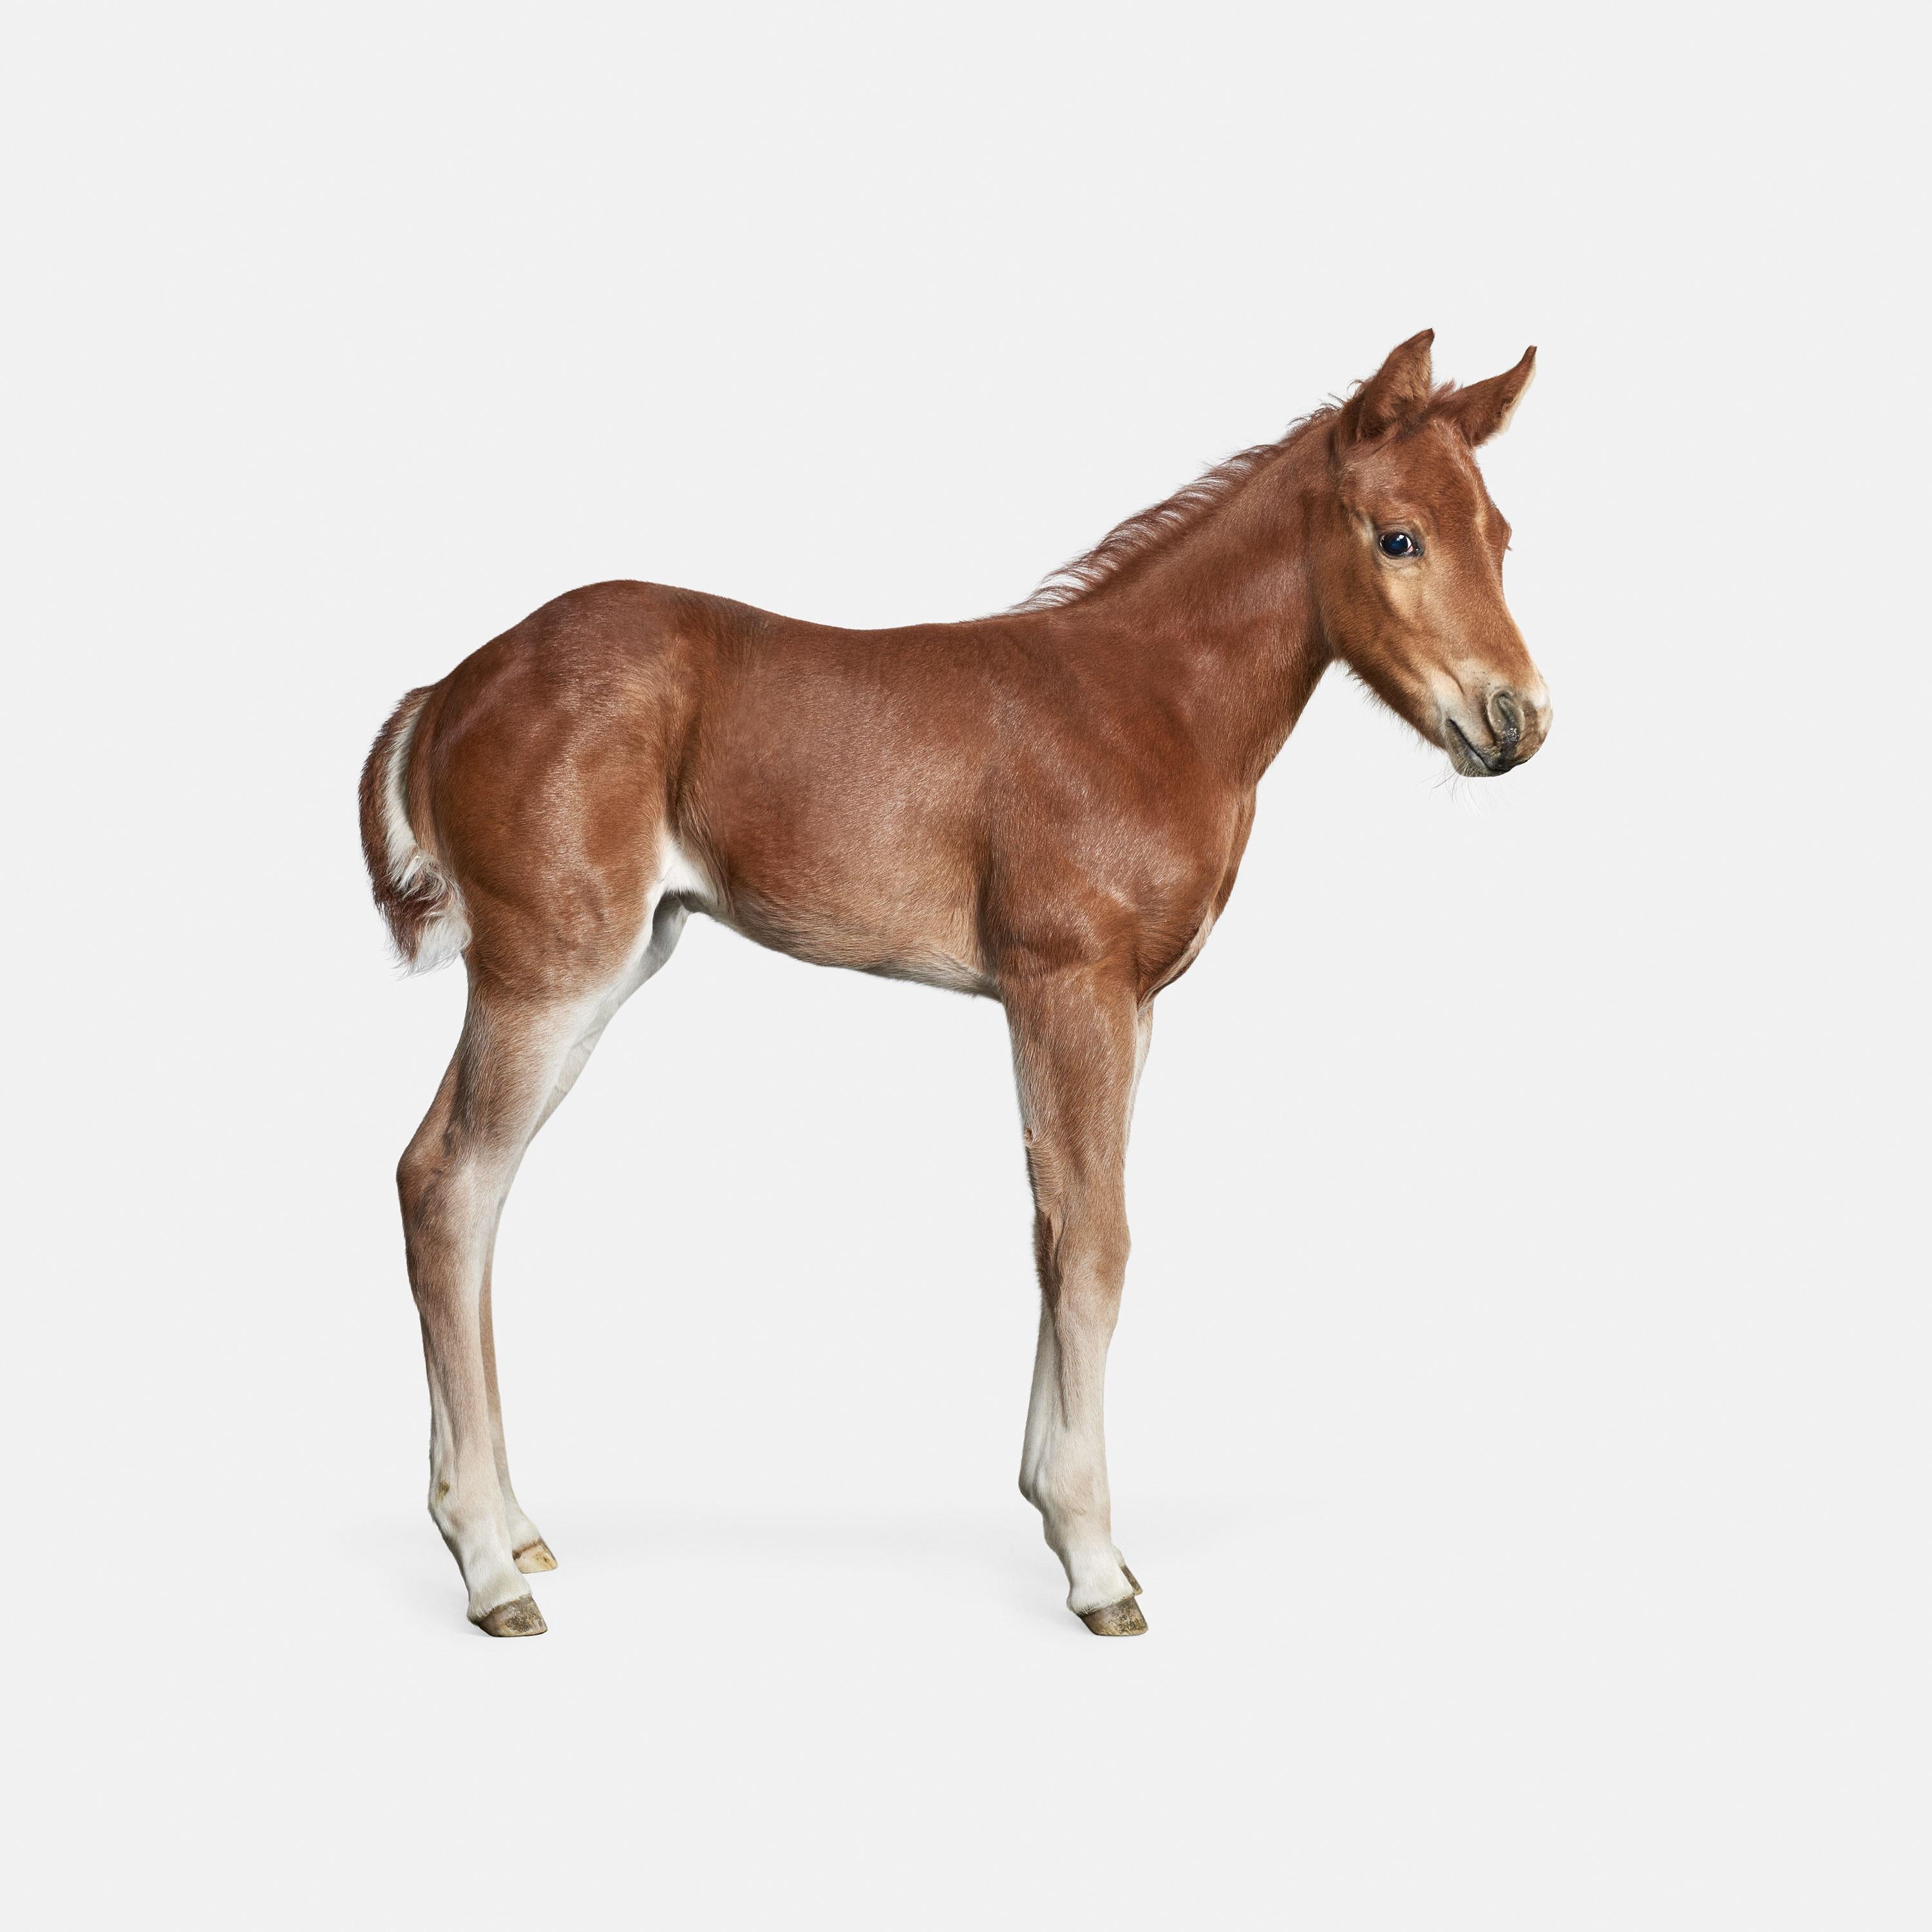 Randal Ford - Foal No. 1, Photography 2018, Printed After